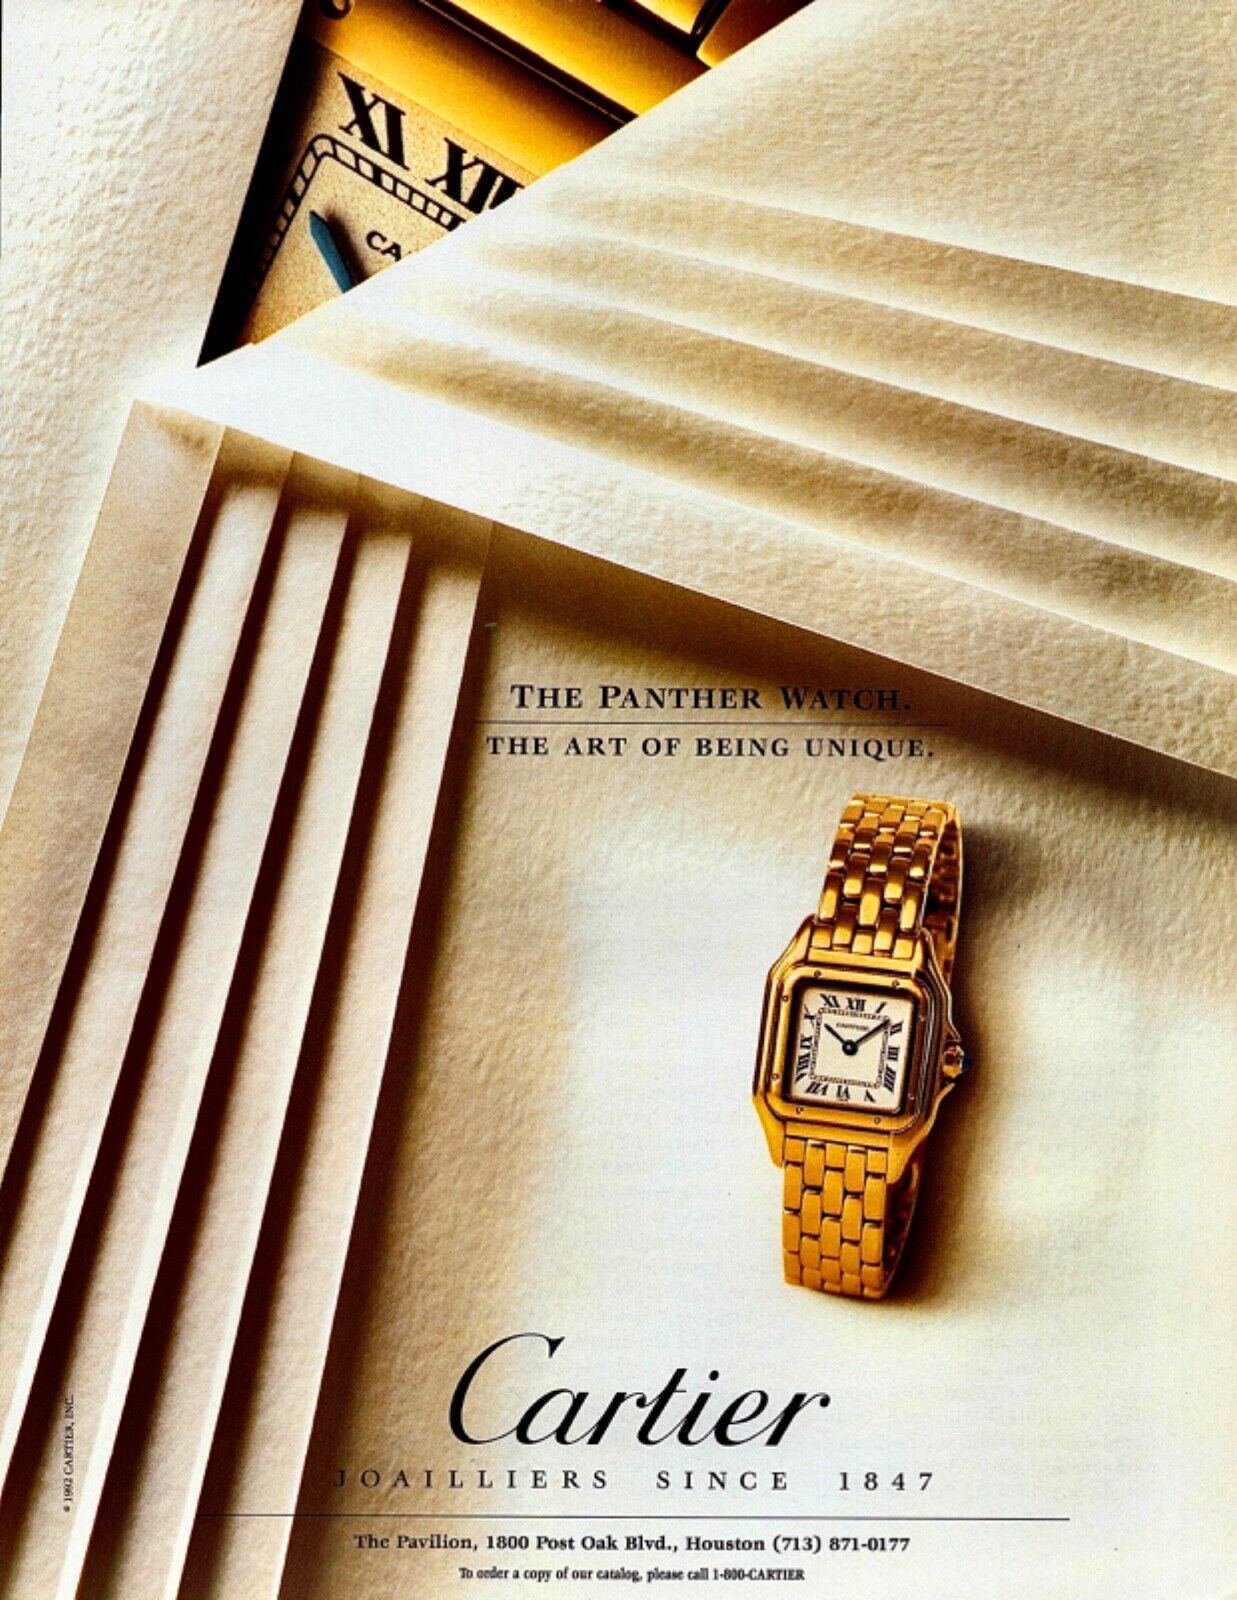 1994 CARTIER Panther Watch ~ The Art Of Being Unique ~ VINTAGE PRINT AD